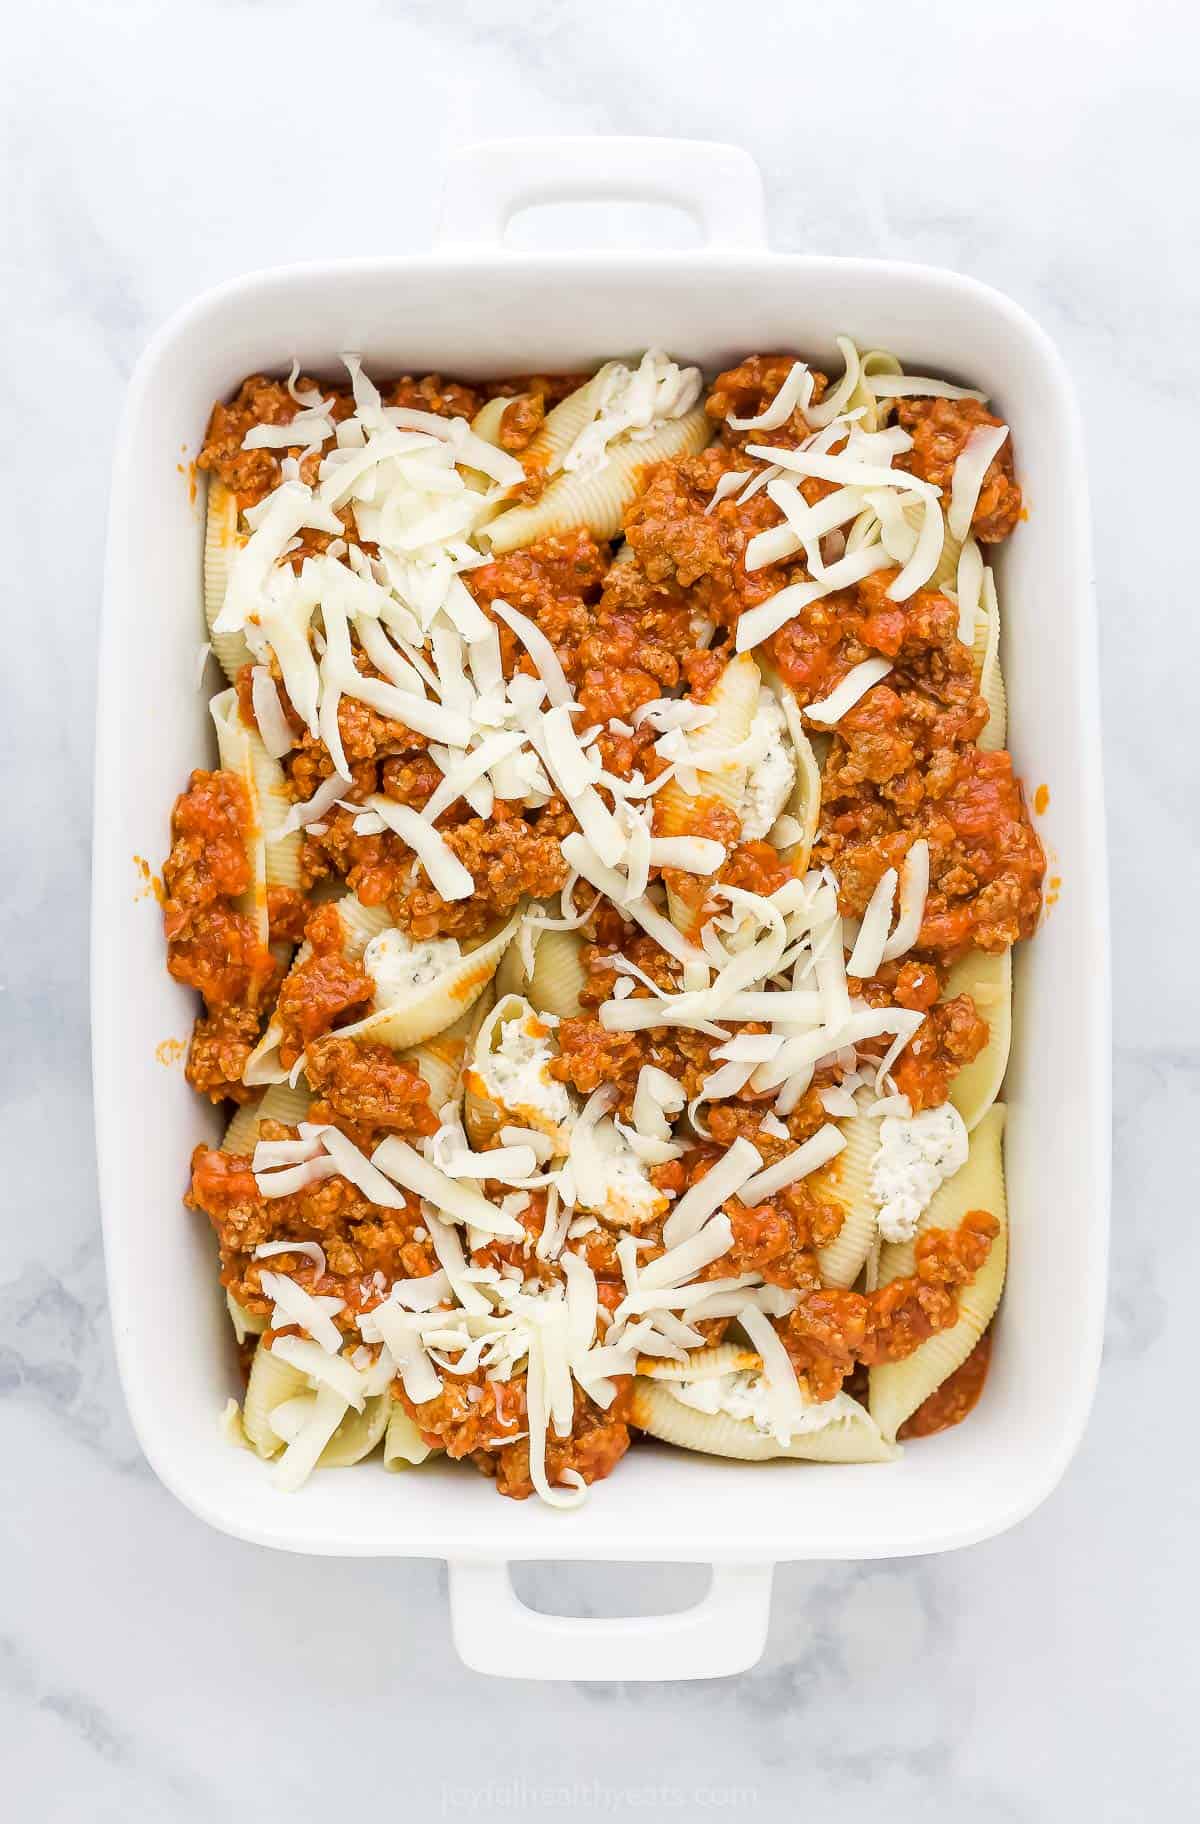 The unbaked stuffed shells and meat sauce in a casserole dish after the mozzarella has been added